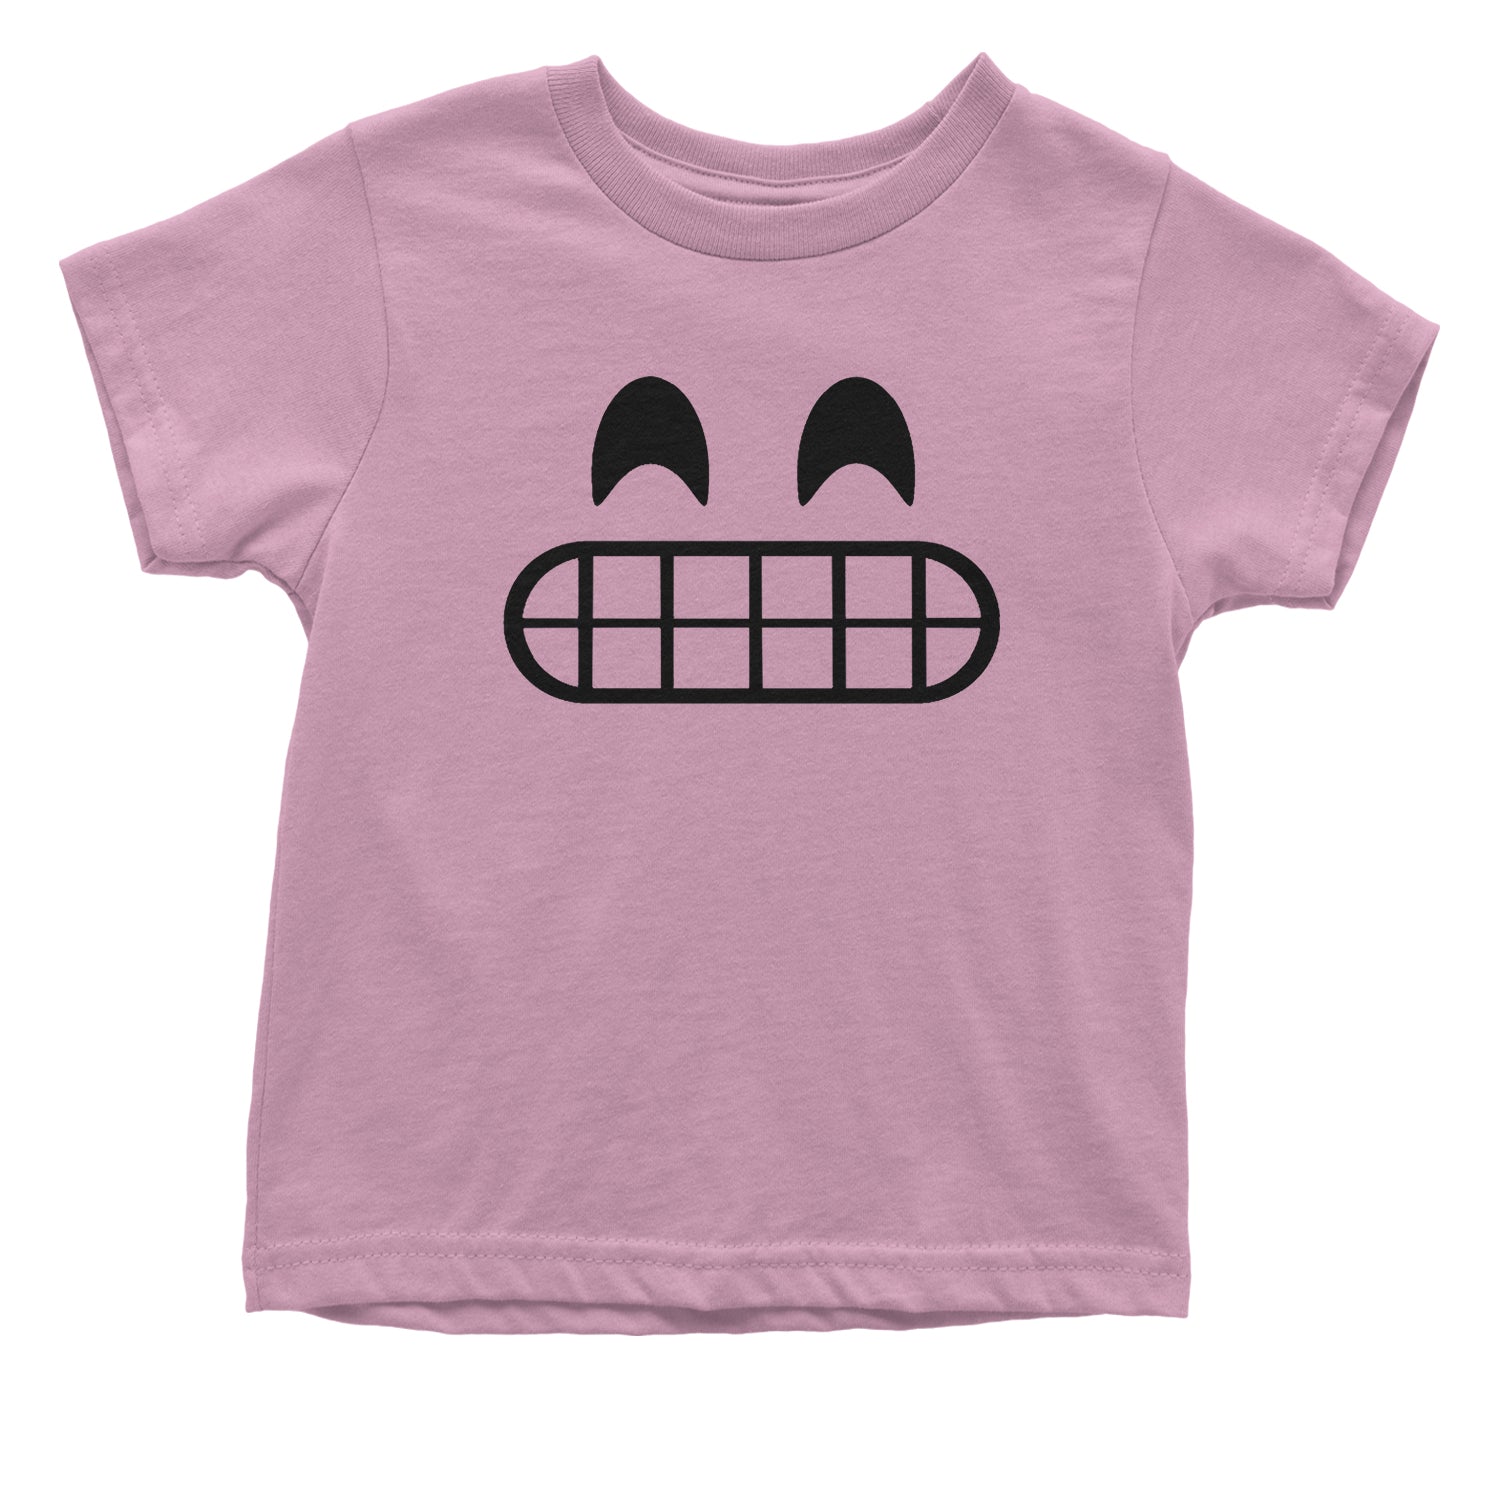 Emoticon Grinning Smile Face Toddler T-Shirt cosplay, costume, dress, emoji, emote, face, halloween, smiley, up, yellow by Expression Tees